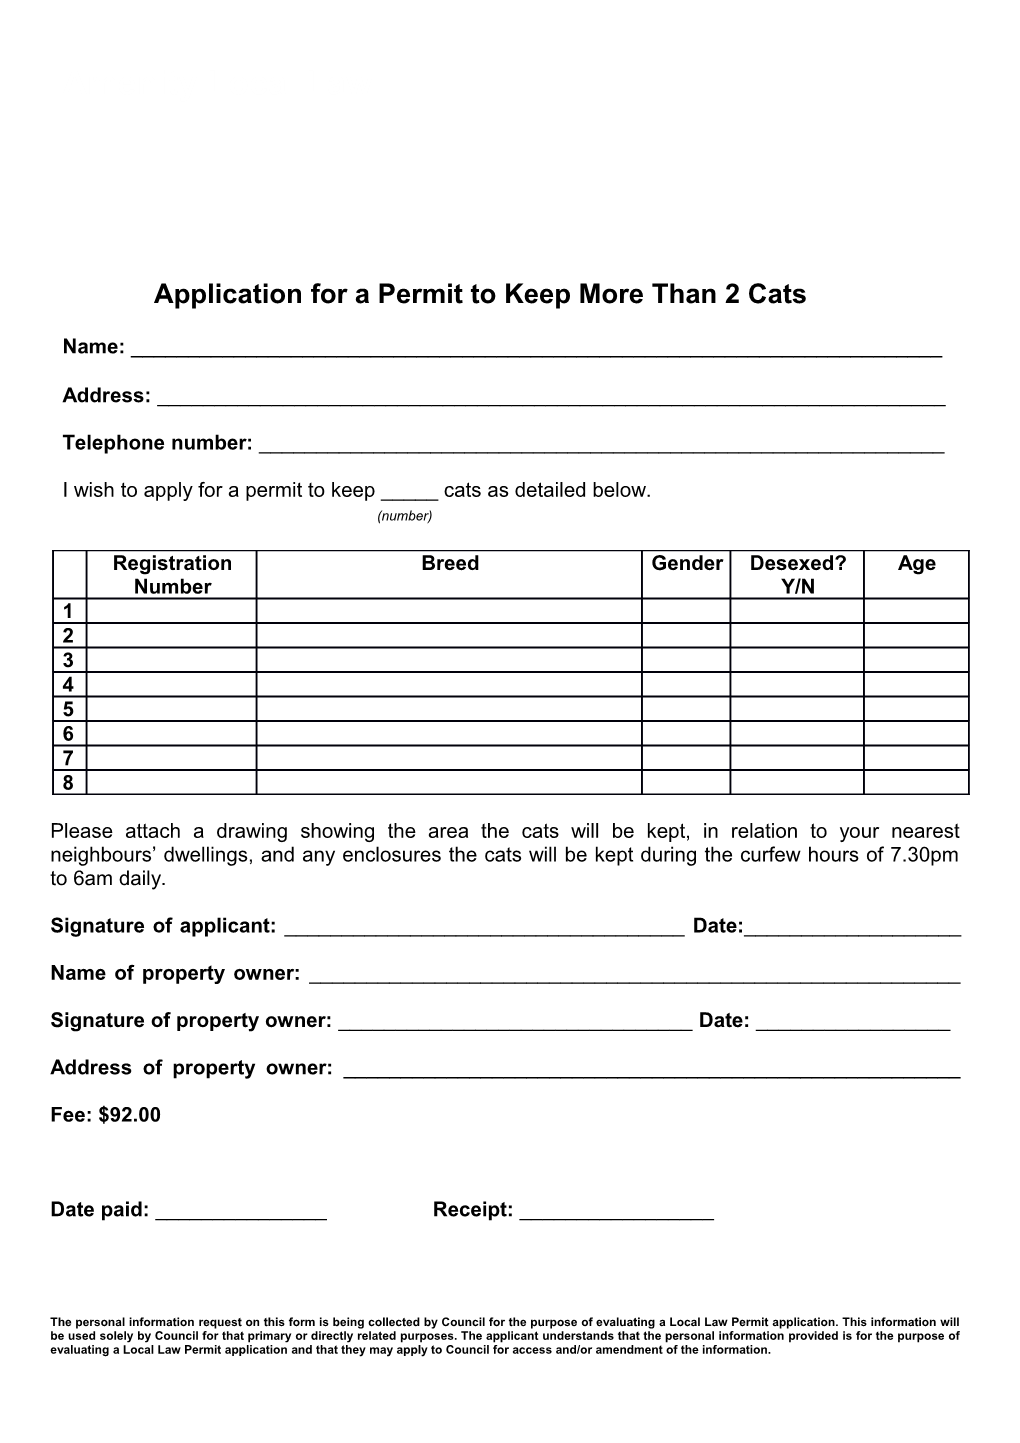 More Than 2 Cats Permit Application